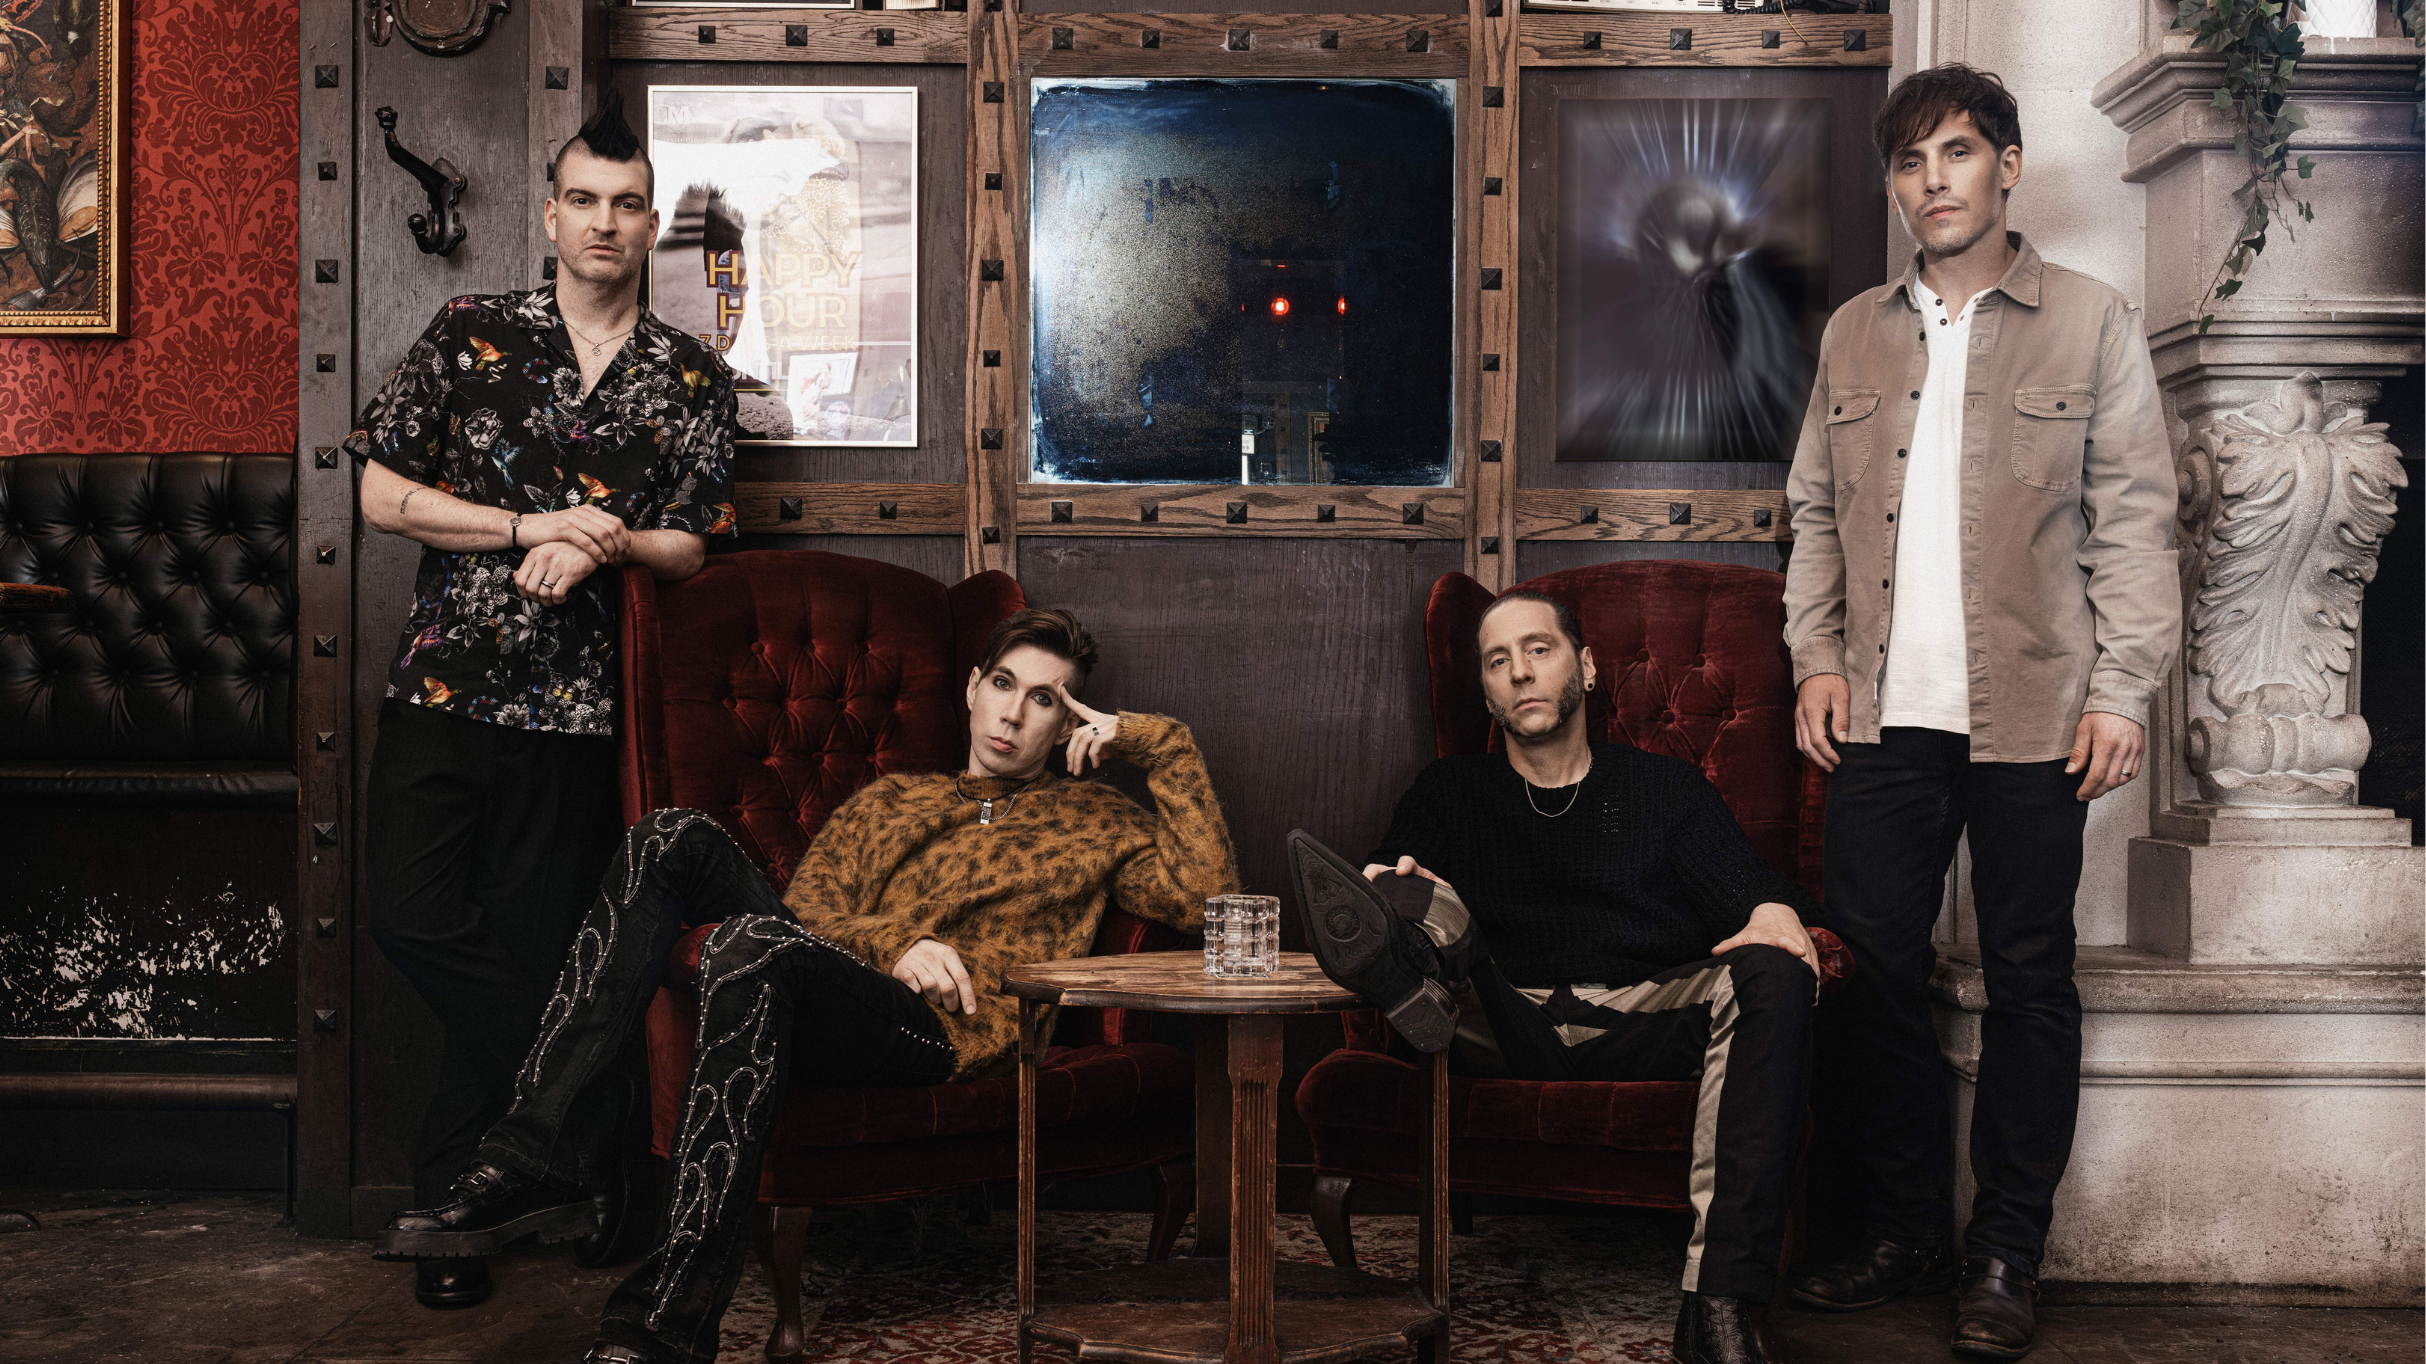 Marianas Trench - The Force of Nature Tour presale password for legit tickets in Minneapolis